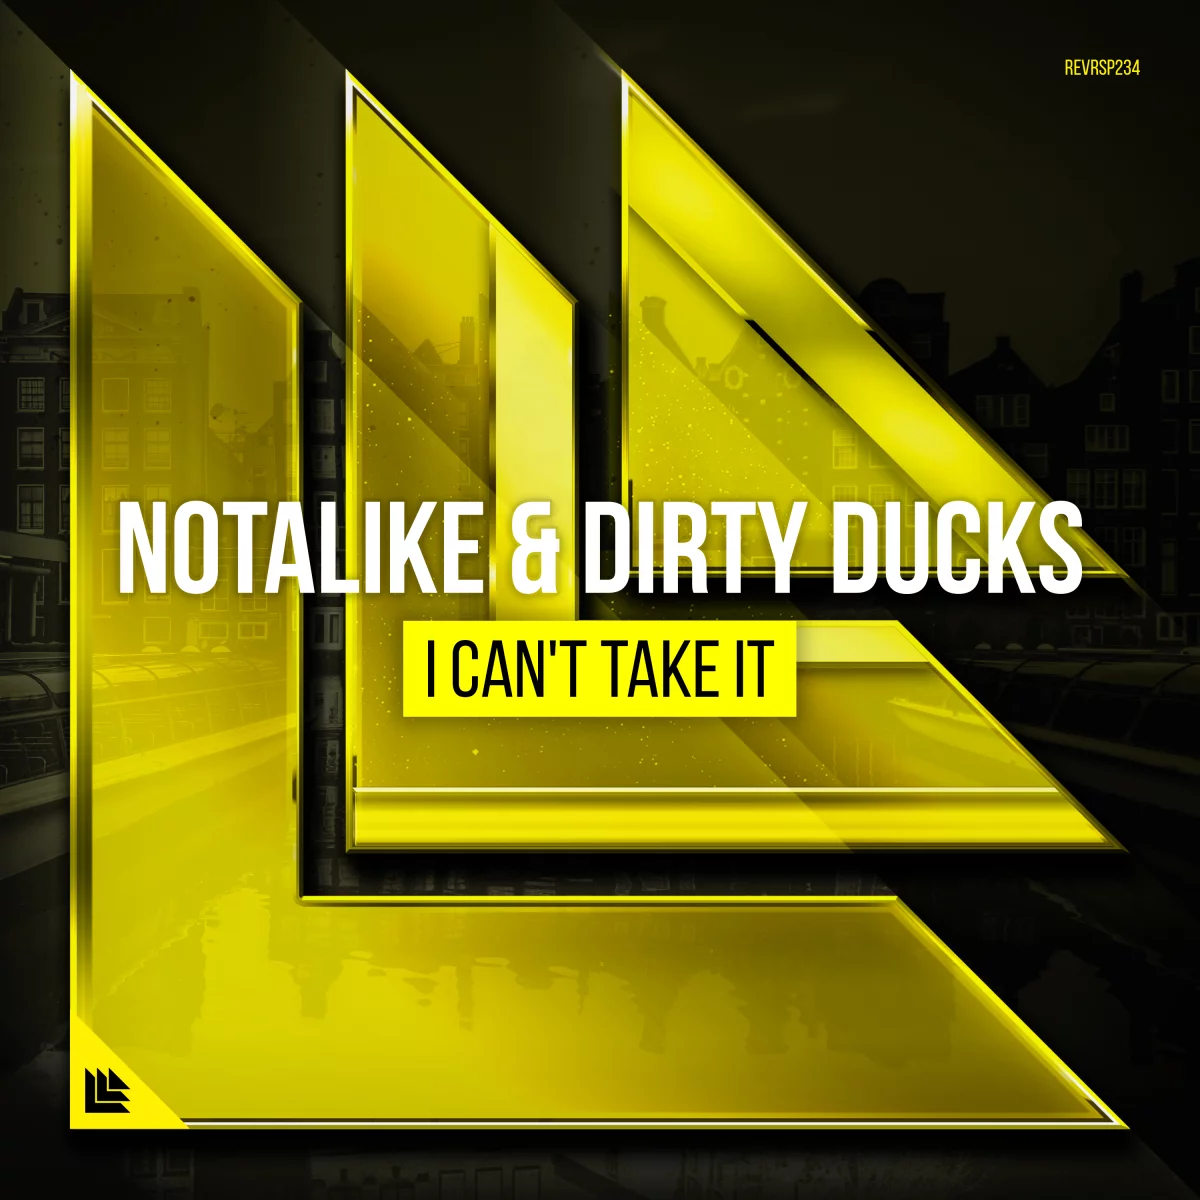  I Can't Take It - Notalike⁠ & Dirty Ducks⁠ ⁠ 